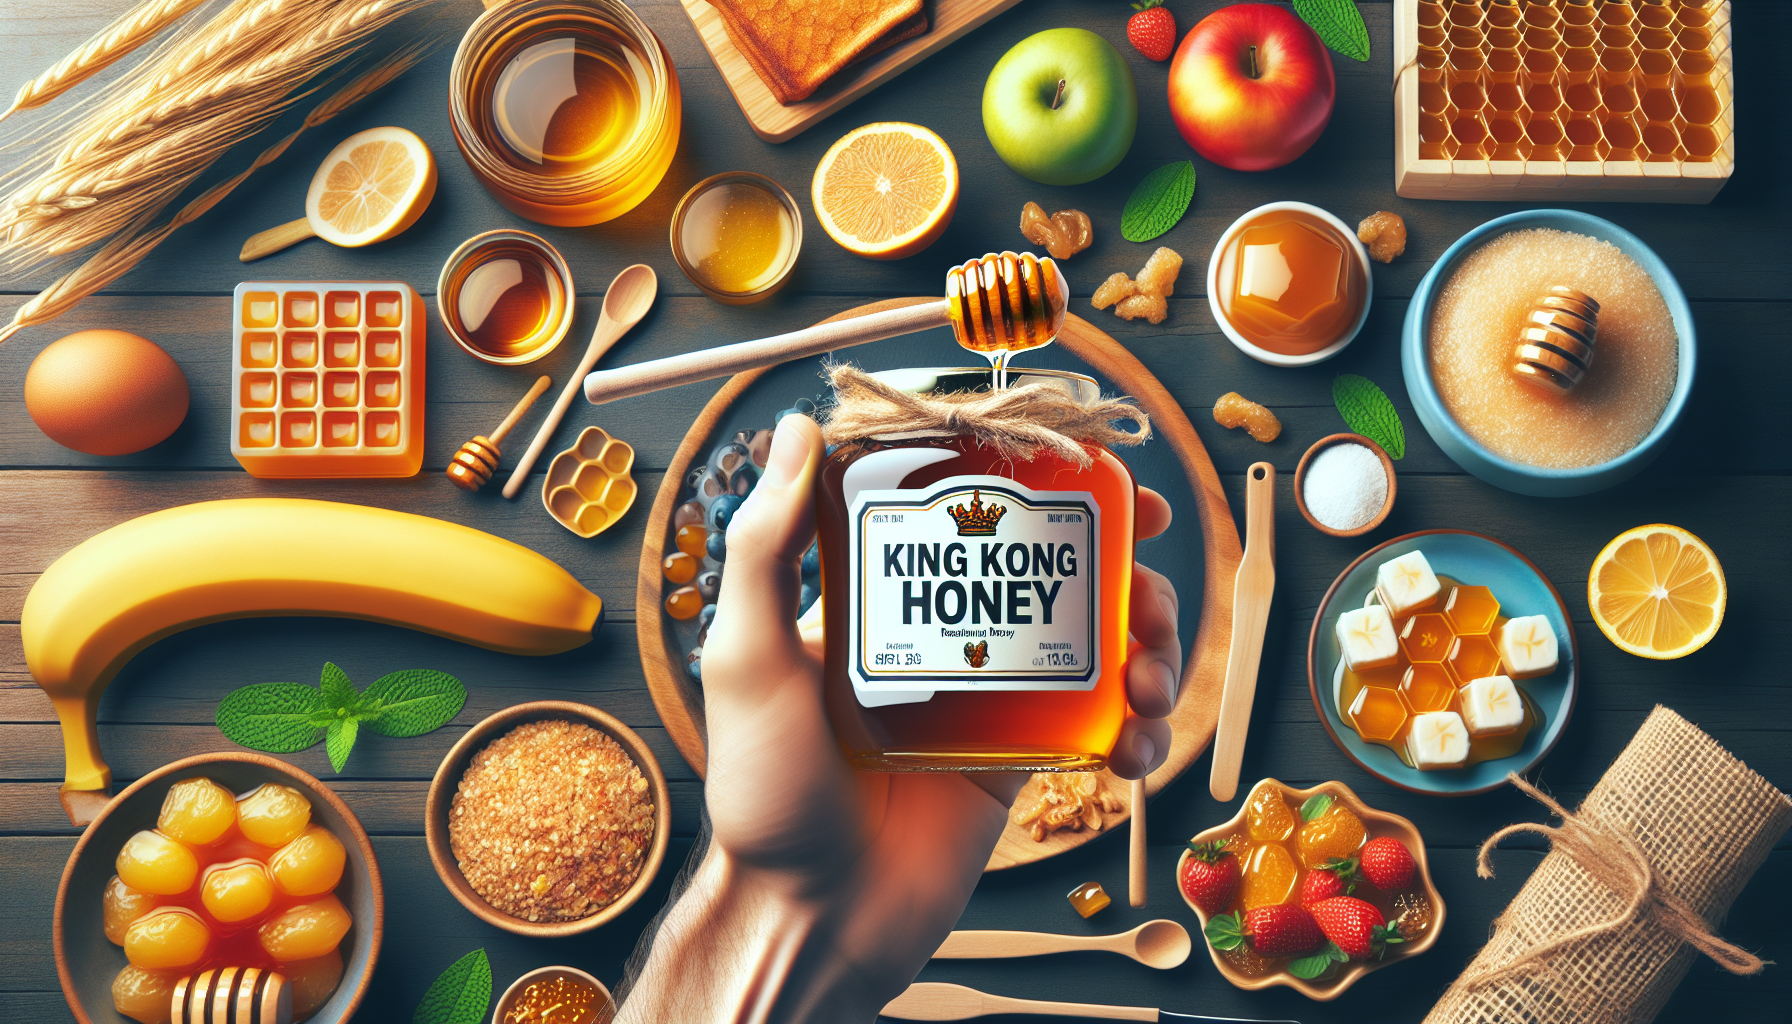 An illustration of king kong honey surrounded by healthy foods and honey